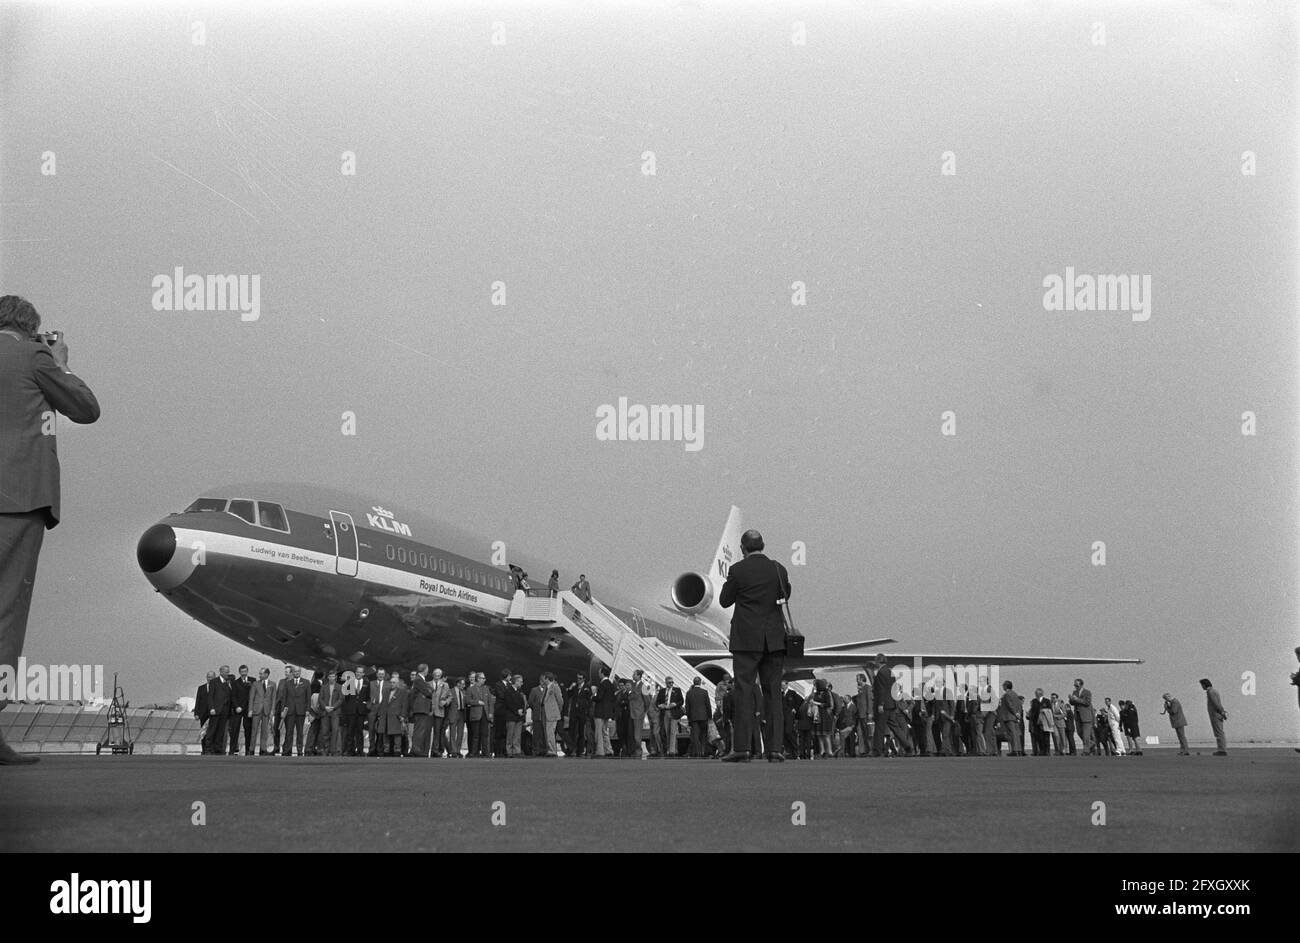 Flight with DC-10 to Nice, group photo in front of DC-10 in Nice, March 6, 1973, GROUP PHOTOS, aircraft, The Netherlands, 20th century press agency photo, news to remember, documentary, historic photography 1945-1990, visual stories, human history of the Twentieth Century, capturing moments in time Stock Photo